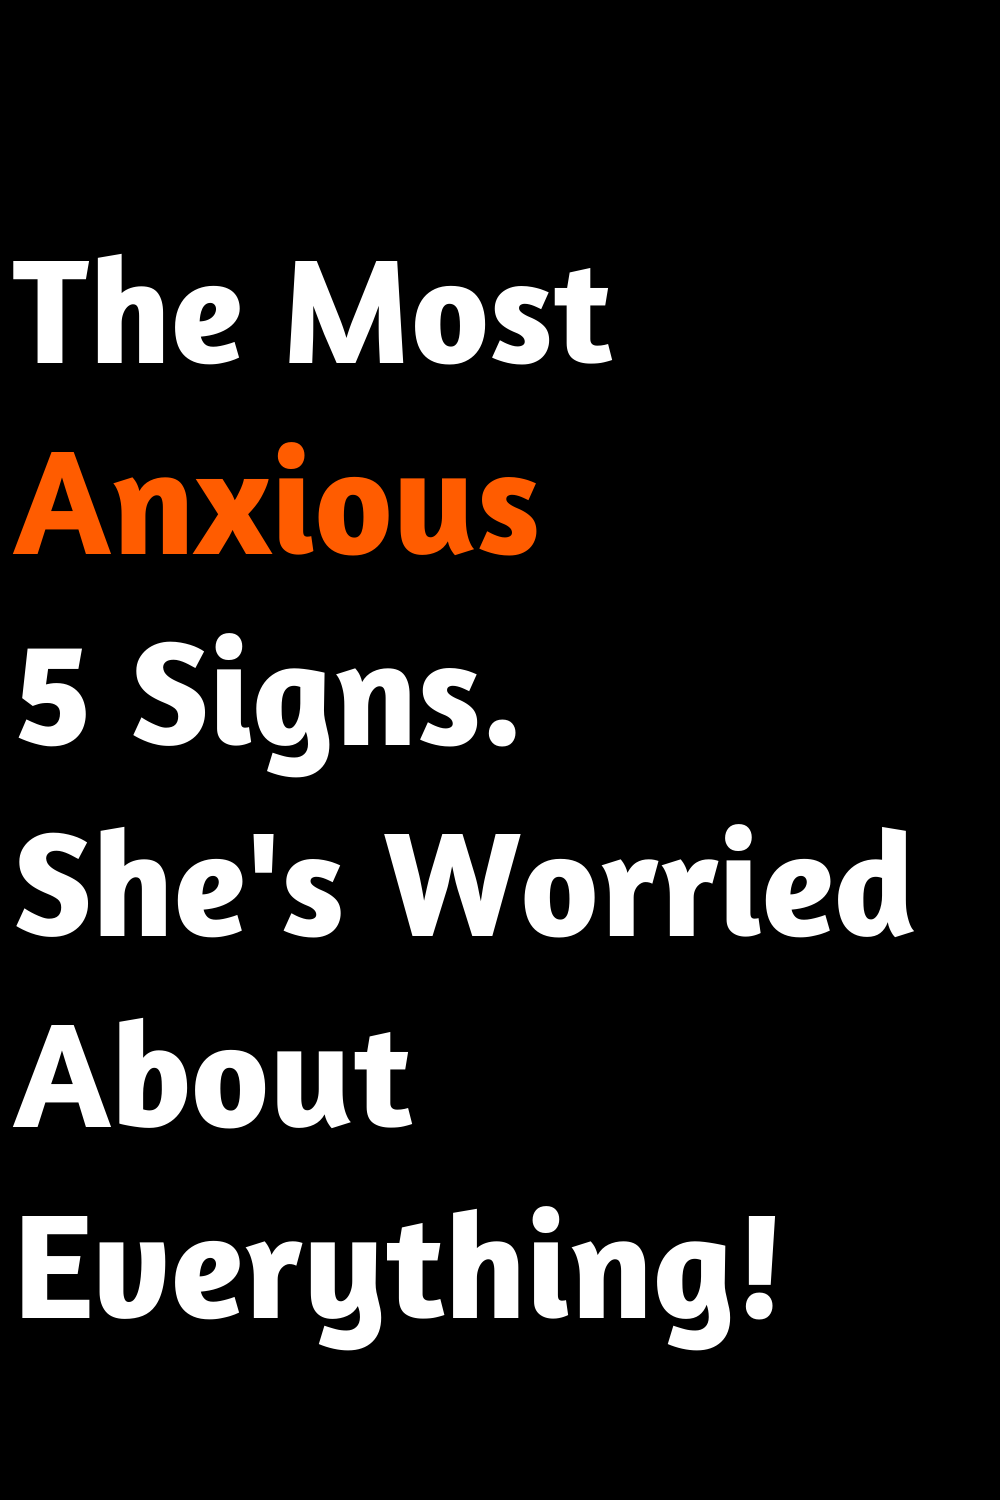 The Most Anxious 5 Signs. She's Worried About Everything!